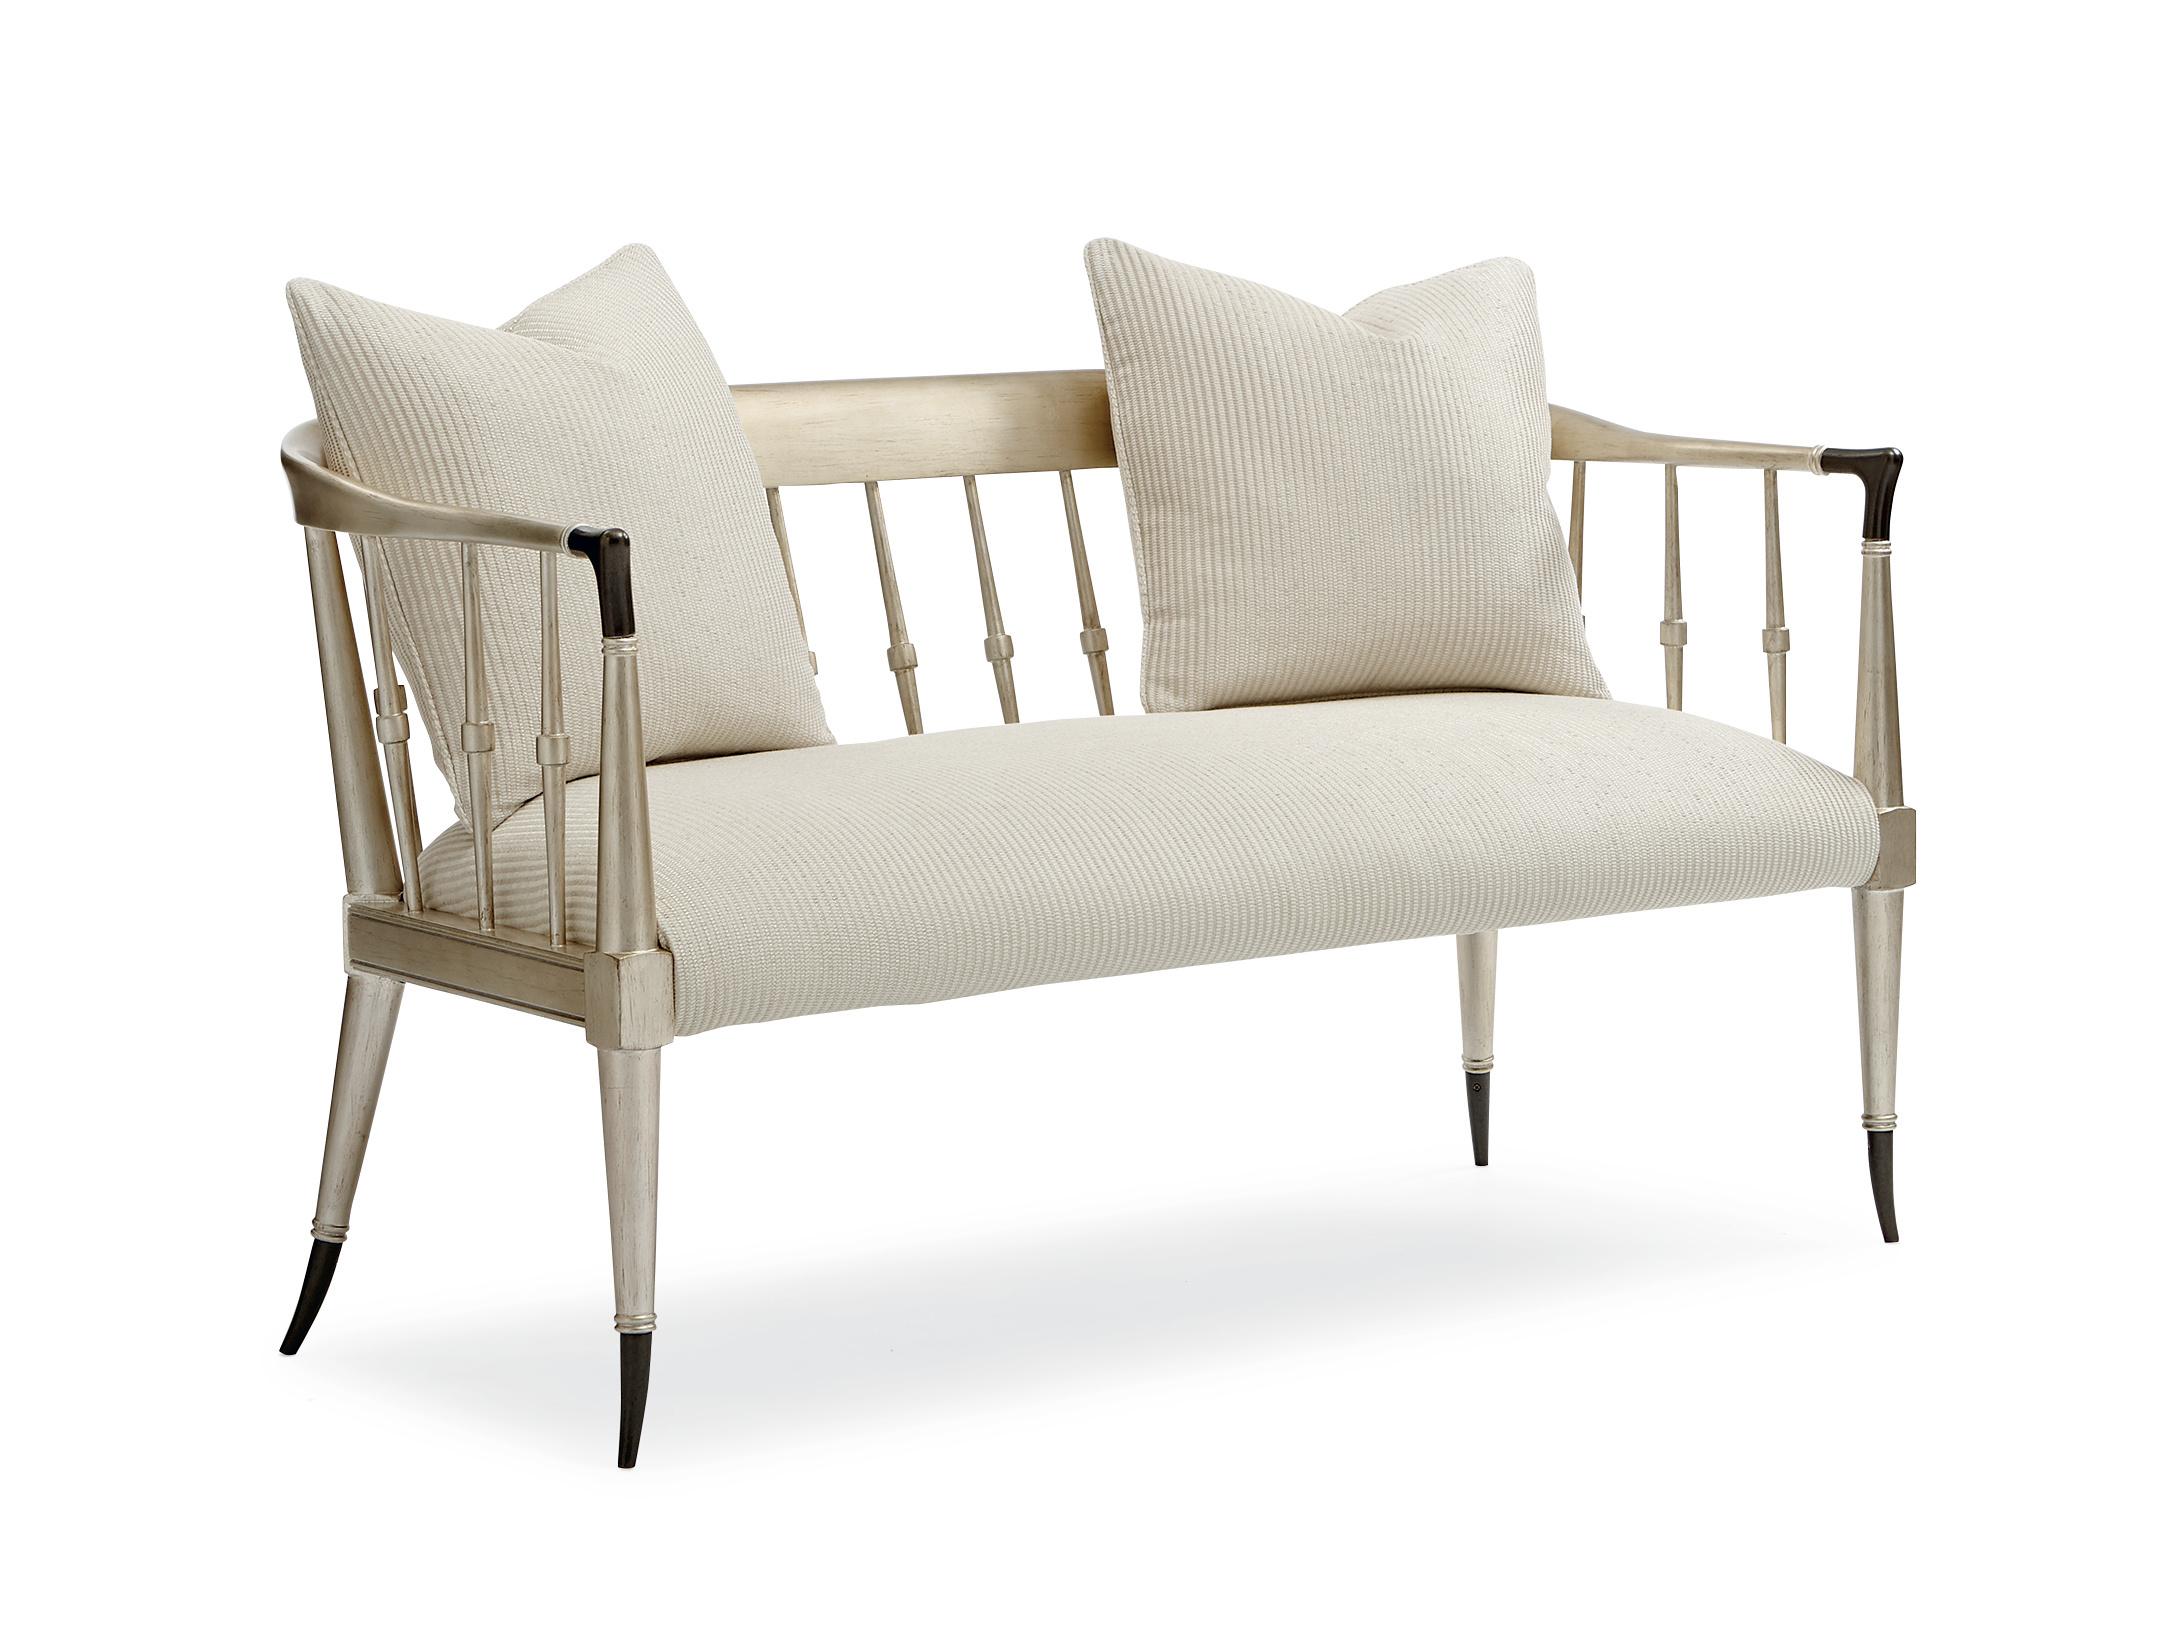 Traditional Loveseat Twice As Beautiful UPH-017-181-A in Cream Fabric